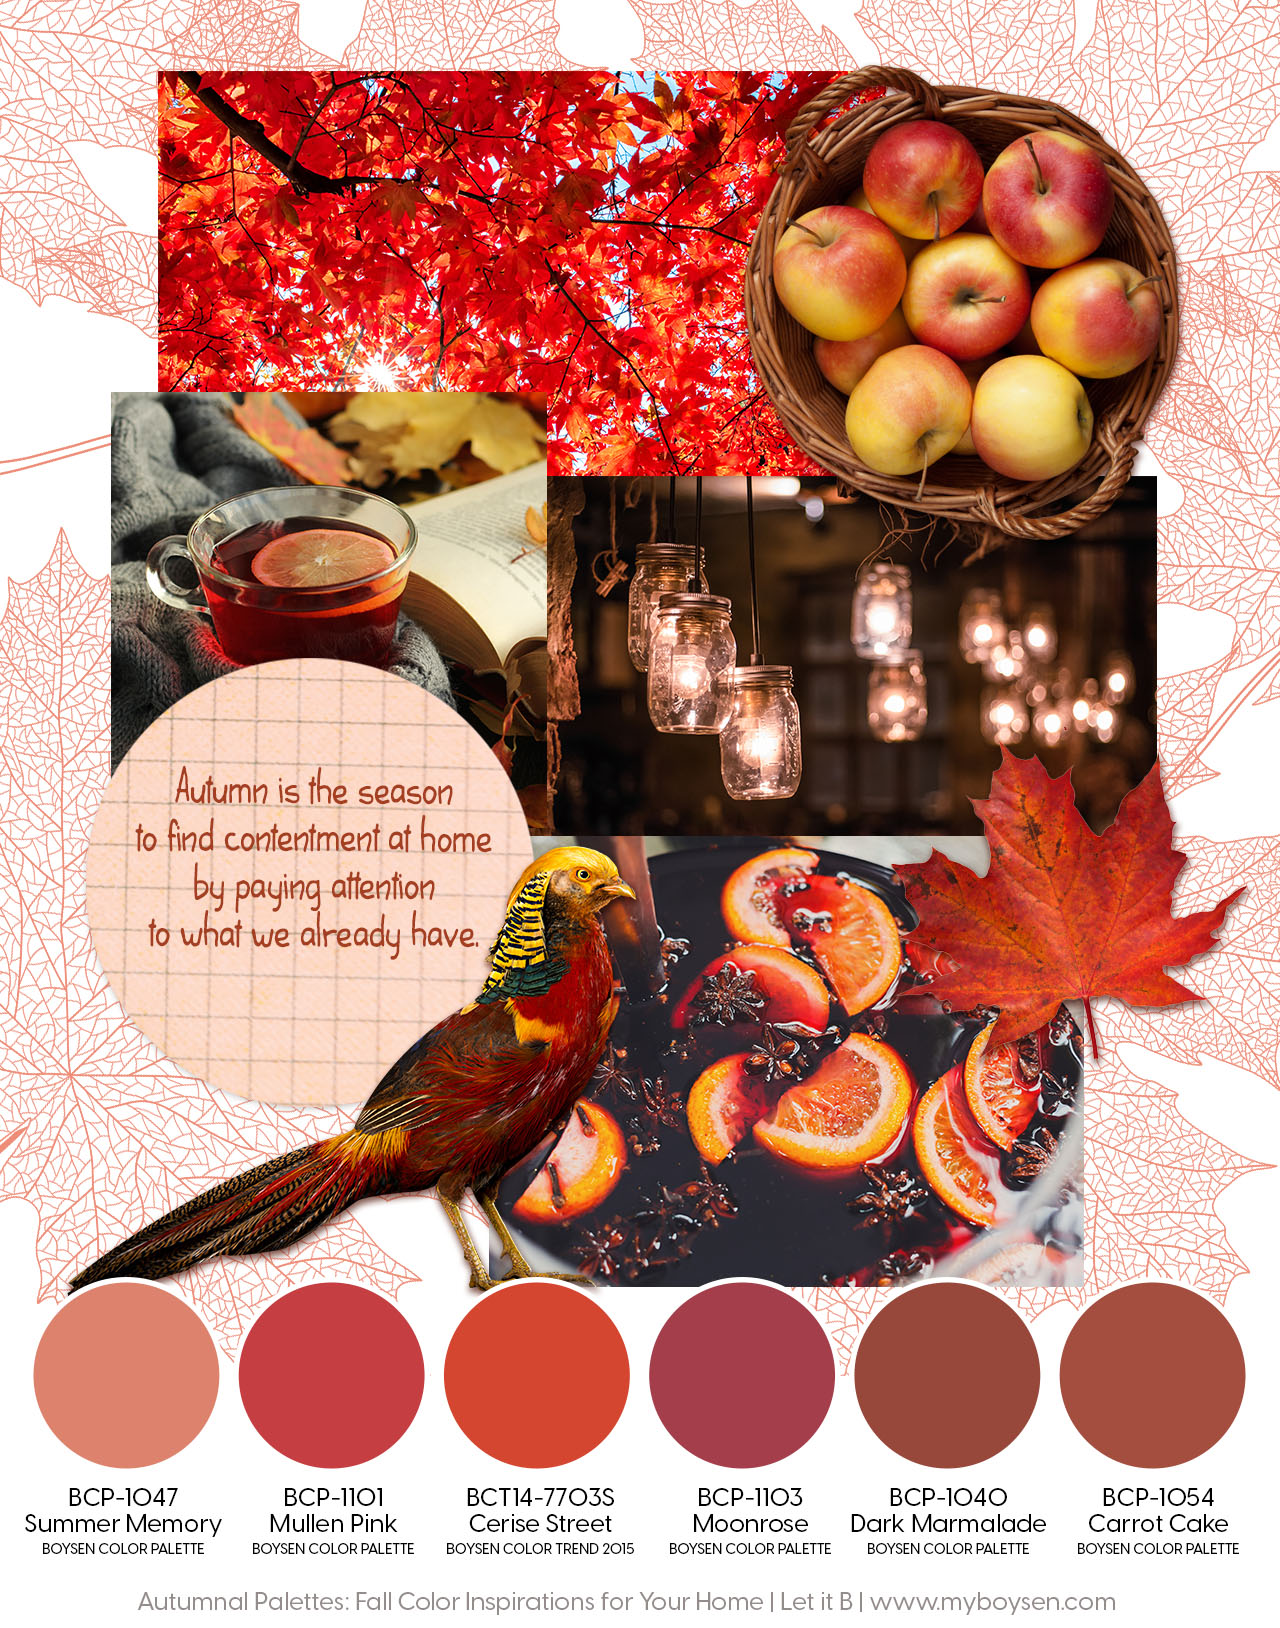 Autumnal Palettes: Fall Color Inspirations for Your Home | MyBoysen